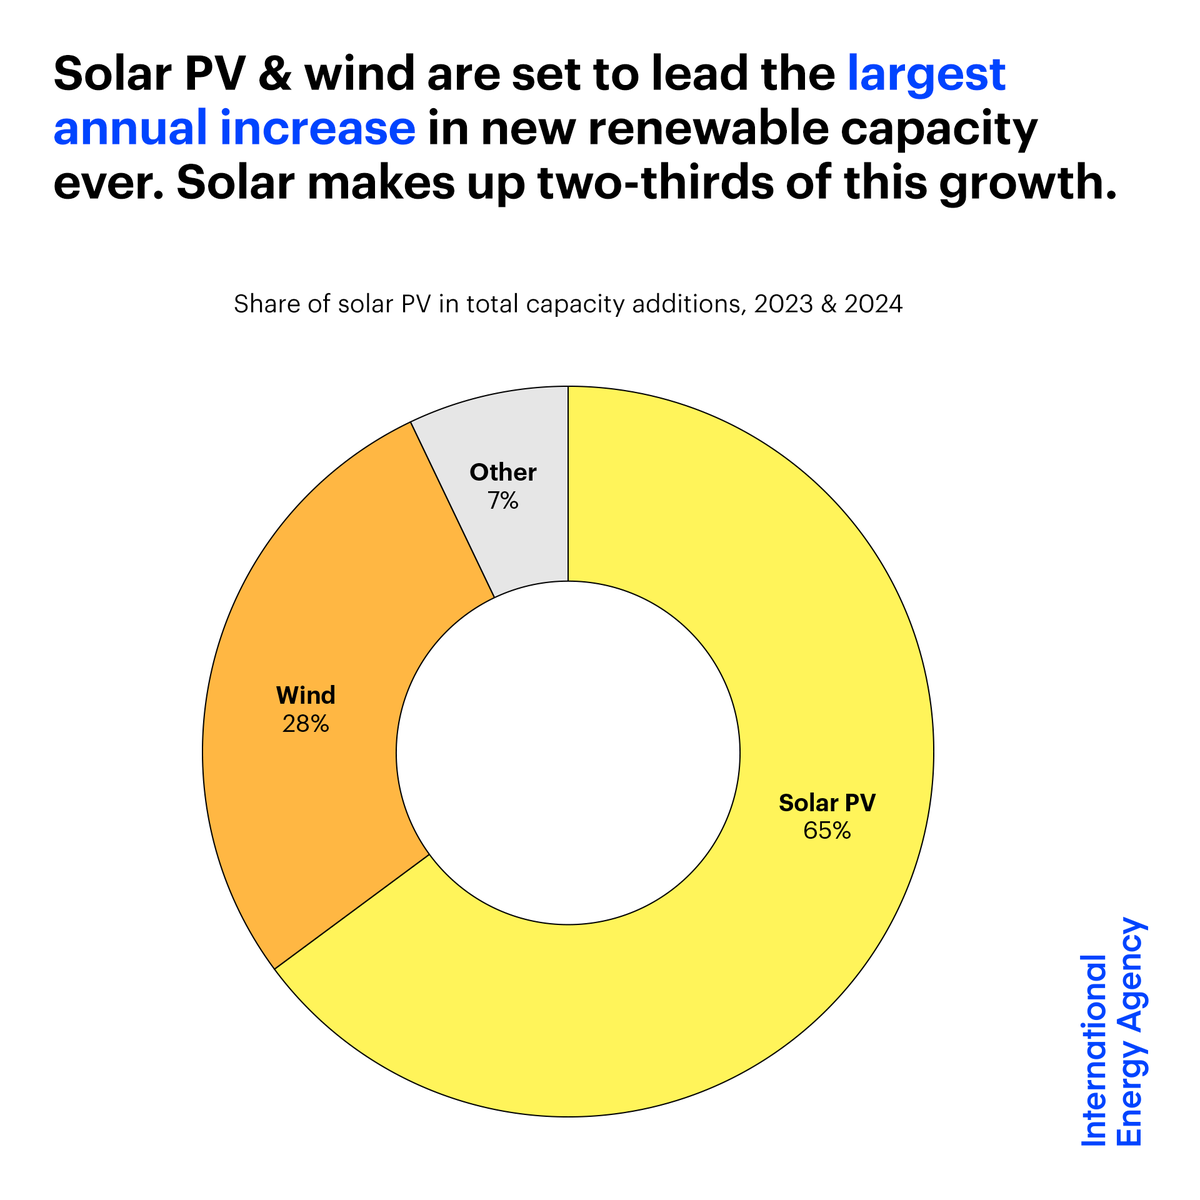 @IEA Solar PV is driving the rapid growth in renewable capacity worldwide, accounting for two-thirds of the expected global increase this year & next. The energy crisis has turbocharged demand for both large-scale plants & rooftop solar. @IEA's new report 👉 iea.li/43fjIwd